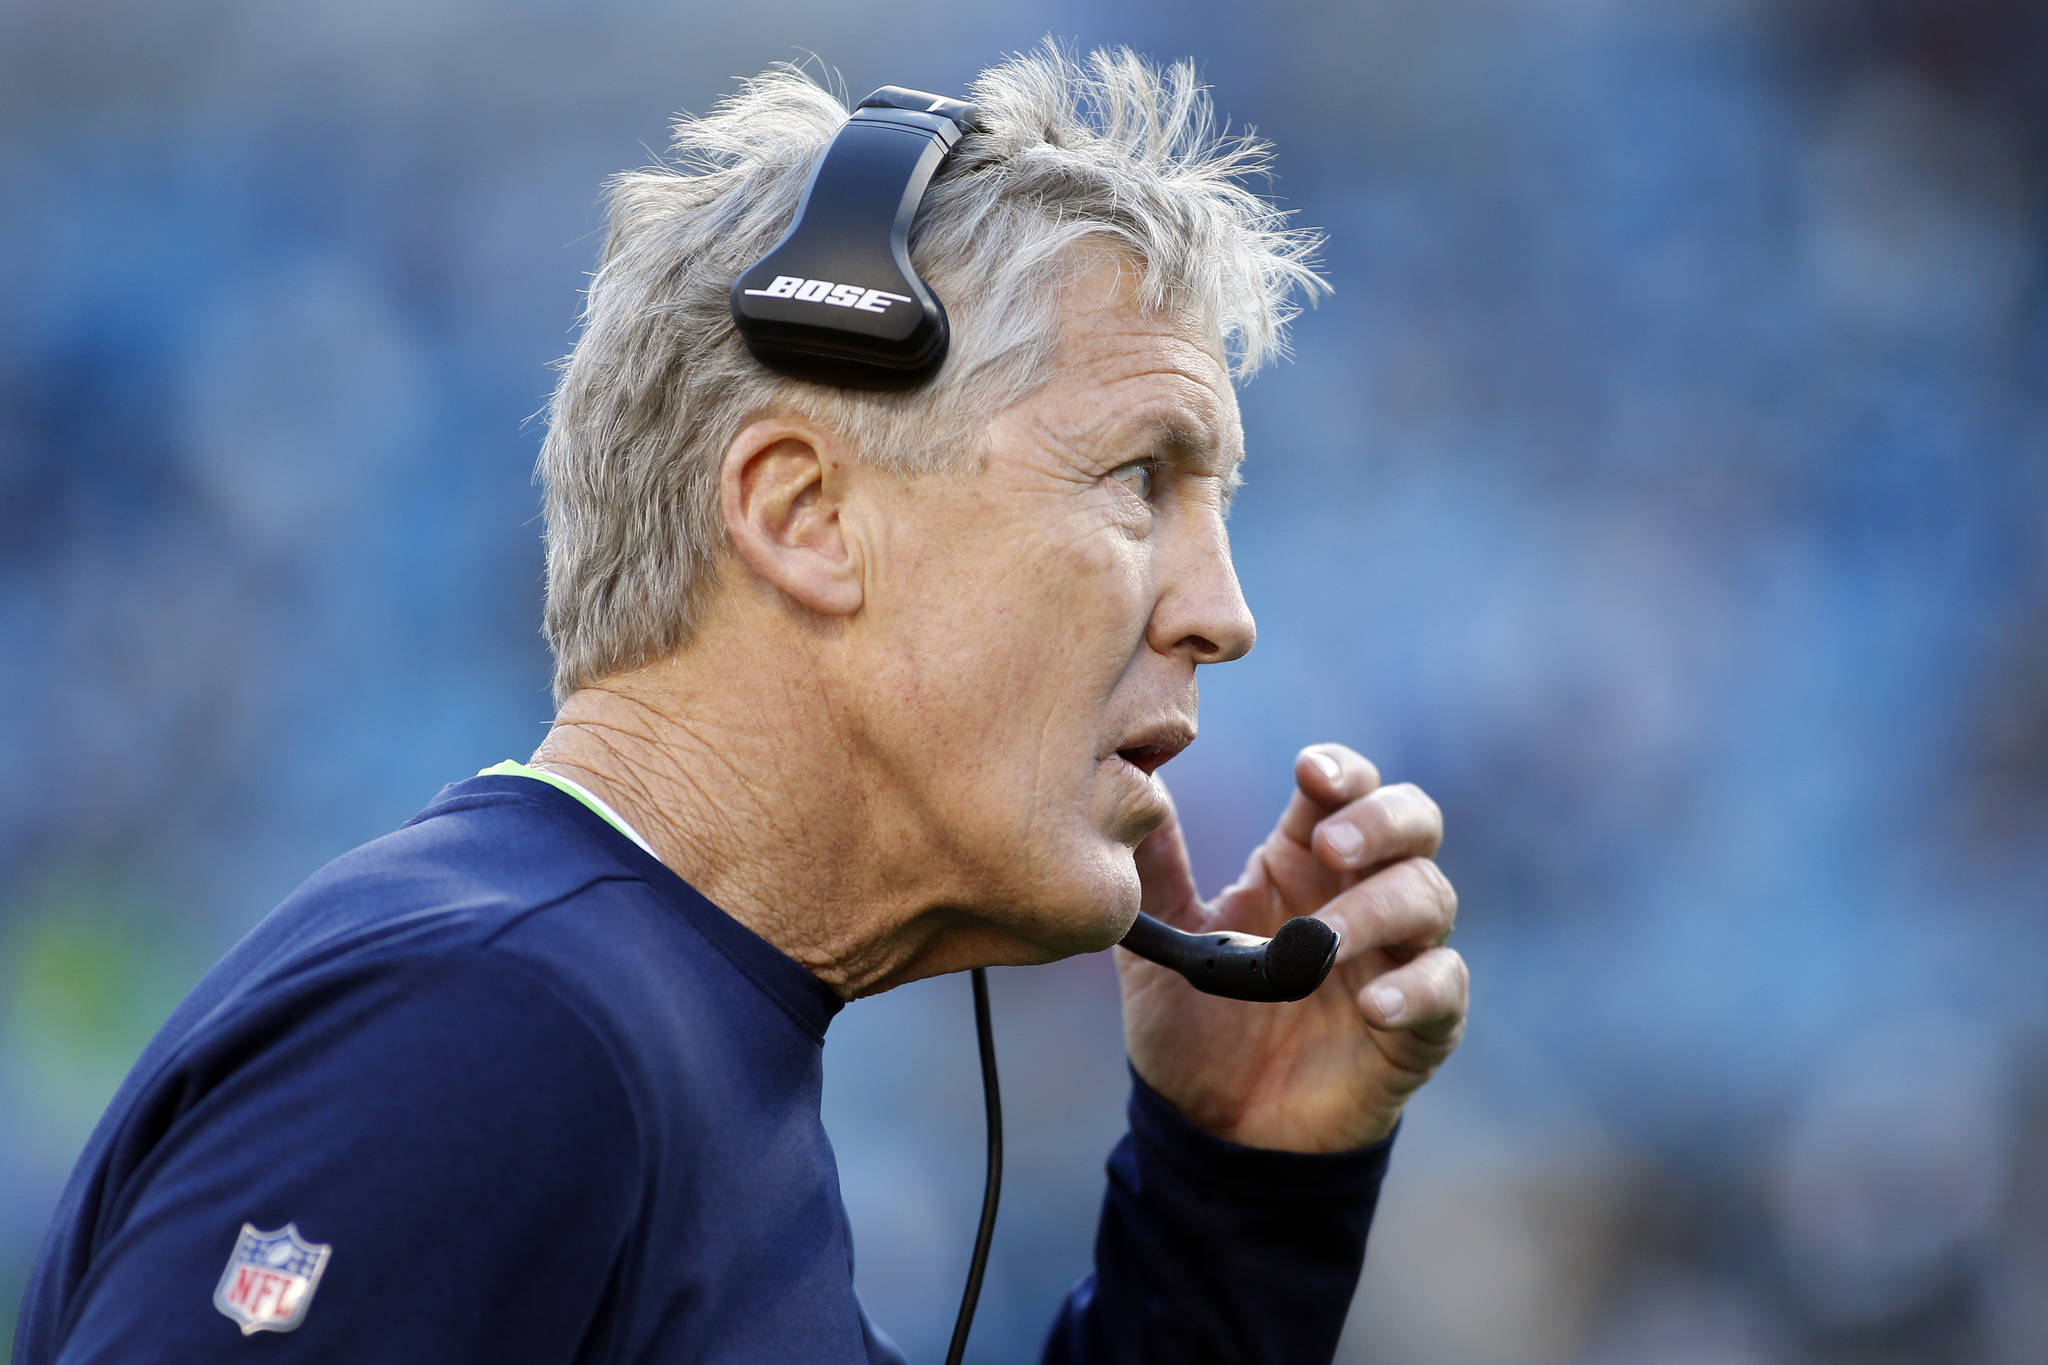 FILE- In this Dec. 15, 2019, file photo, Seattle Seahawks coach Pete Carroll watches from the sideline during the second half of the team’s NFL football game against the Carolina Panthers in Charlotte, N.C. This fall, all four teams from one division could theoretically make the playoffs. If any division is going to do it, the NFC West certainly seems to have the best chance, based on these four teams’ recent body of work and their prospects for the year ahead. (AP Photo/Brian Blanco, File)